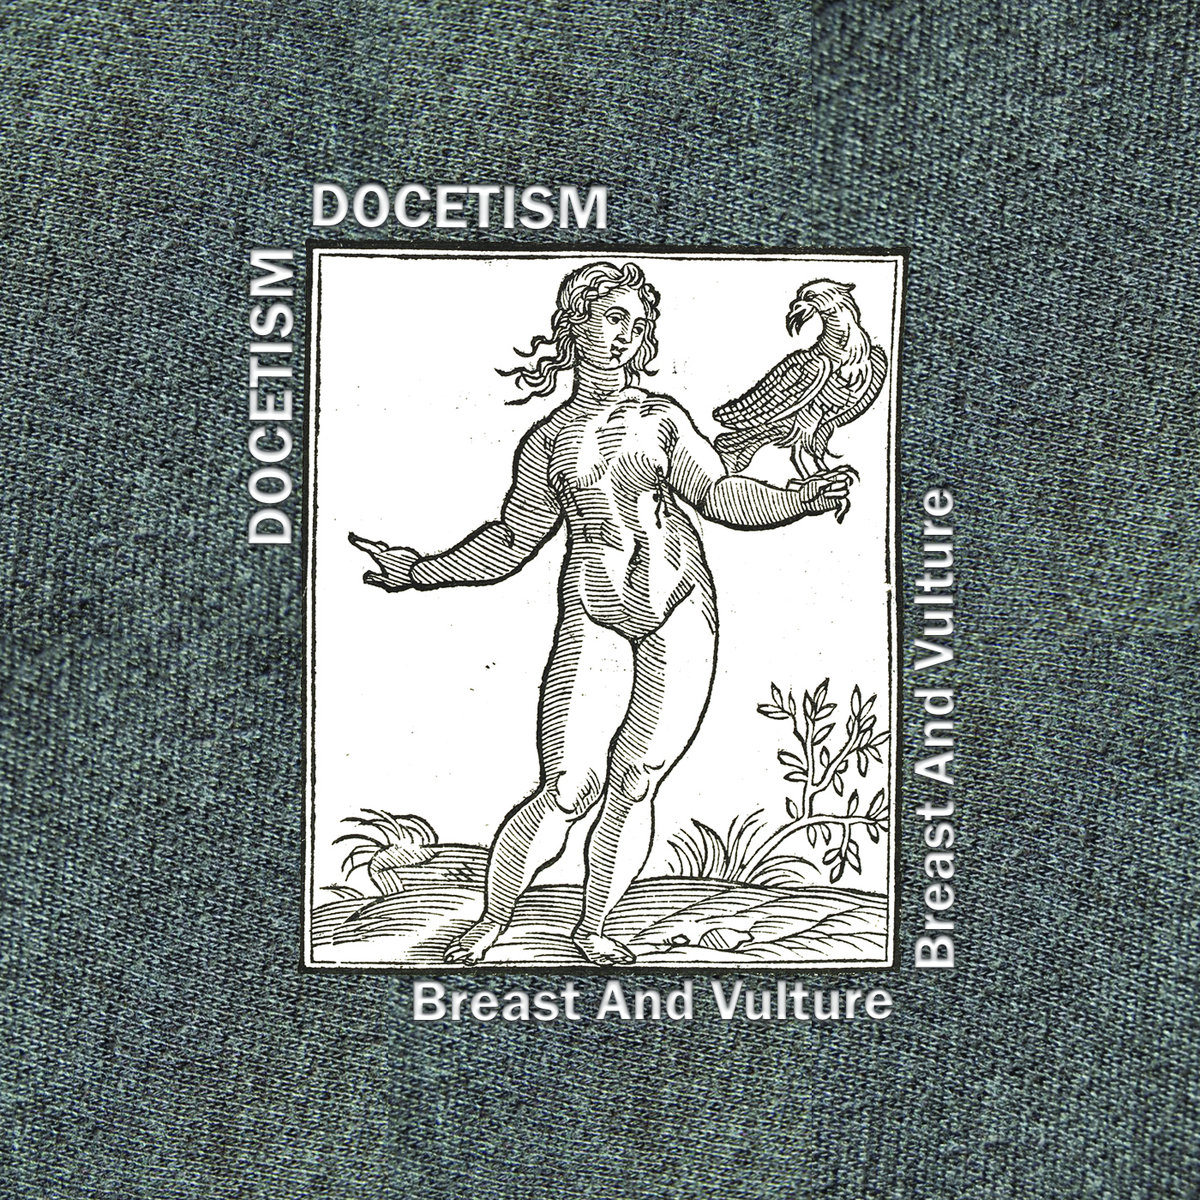 image cover: Docetism - Breast And Vulture / Rohs! Records